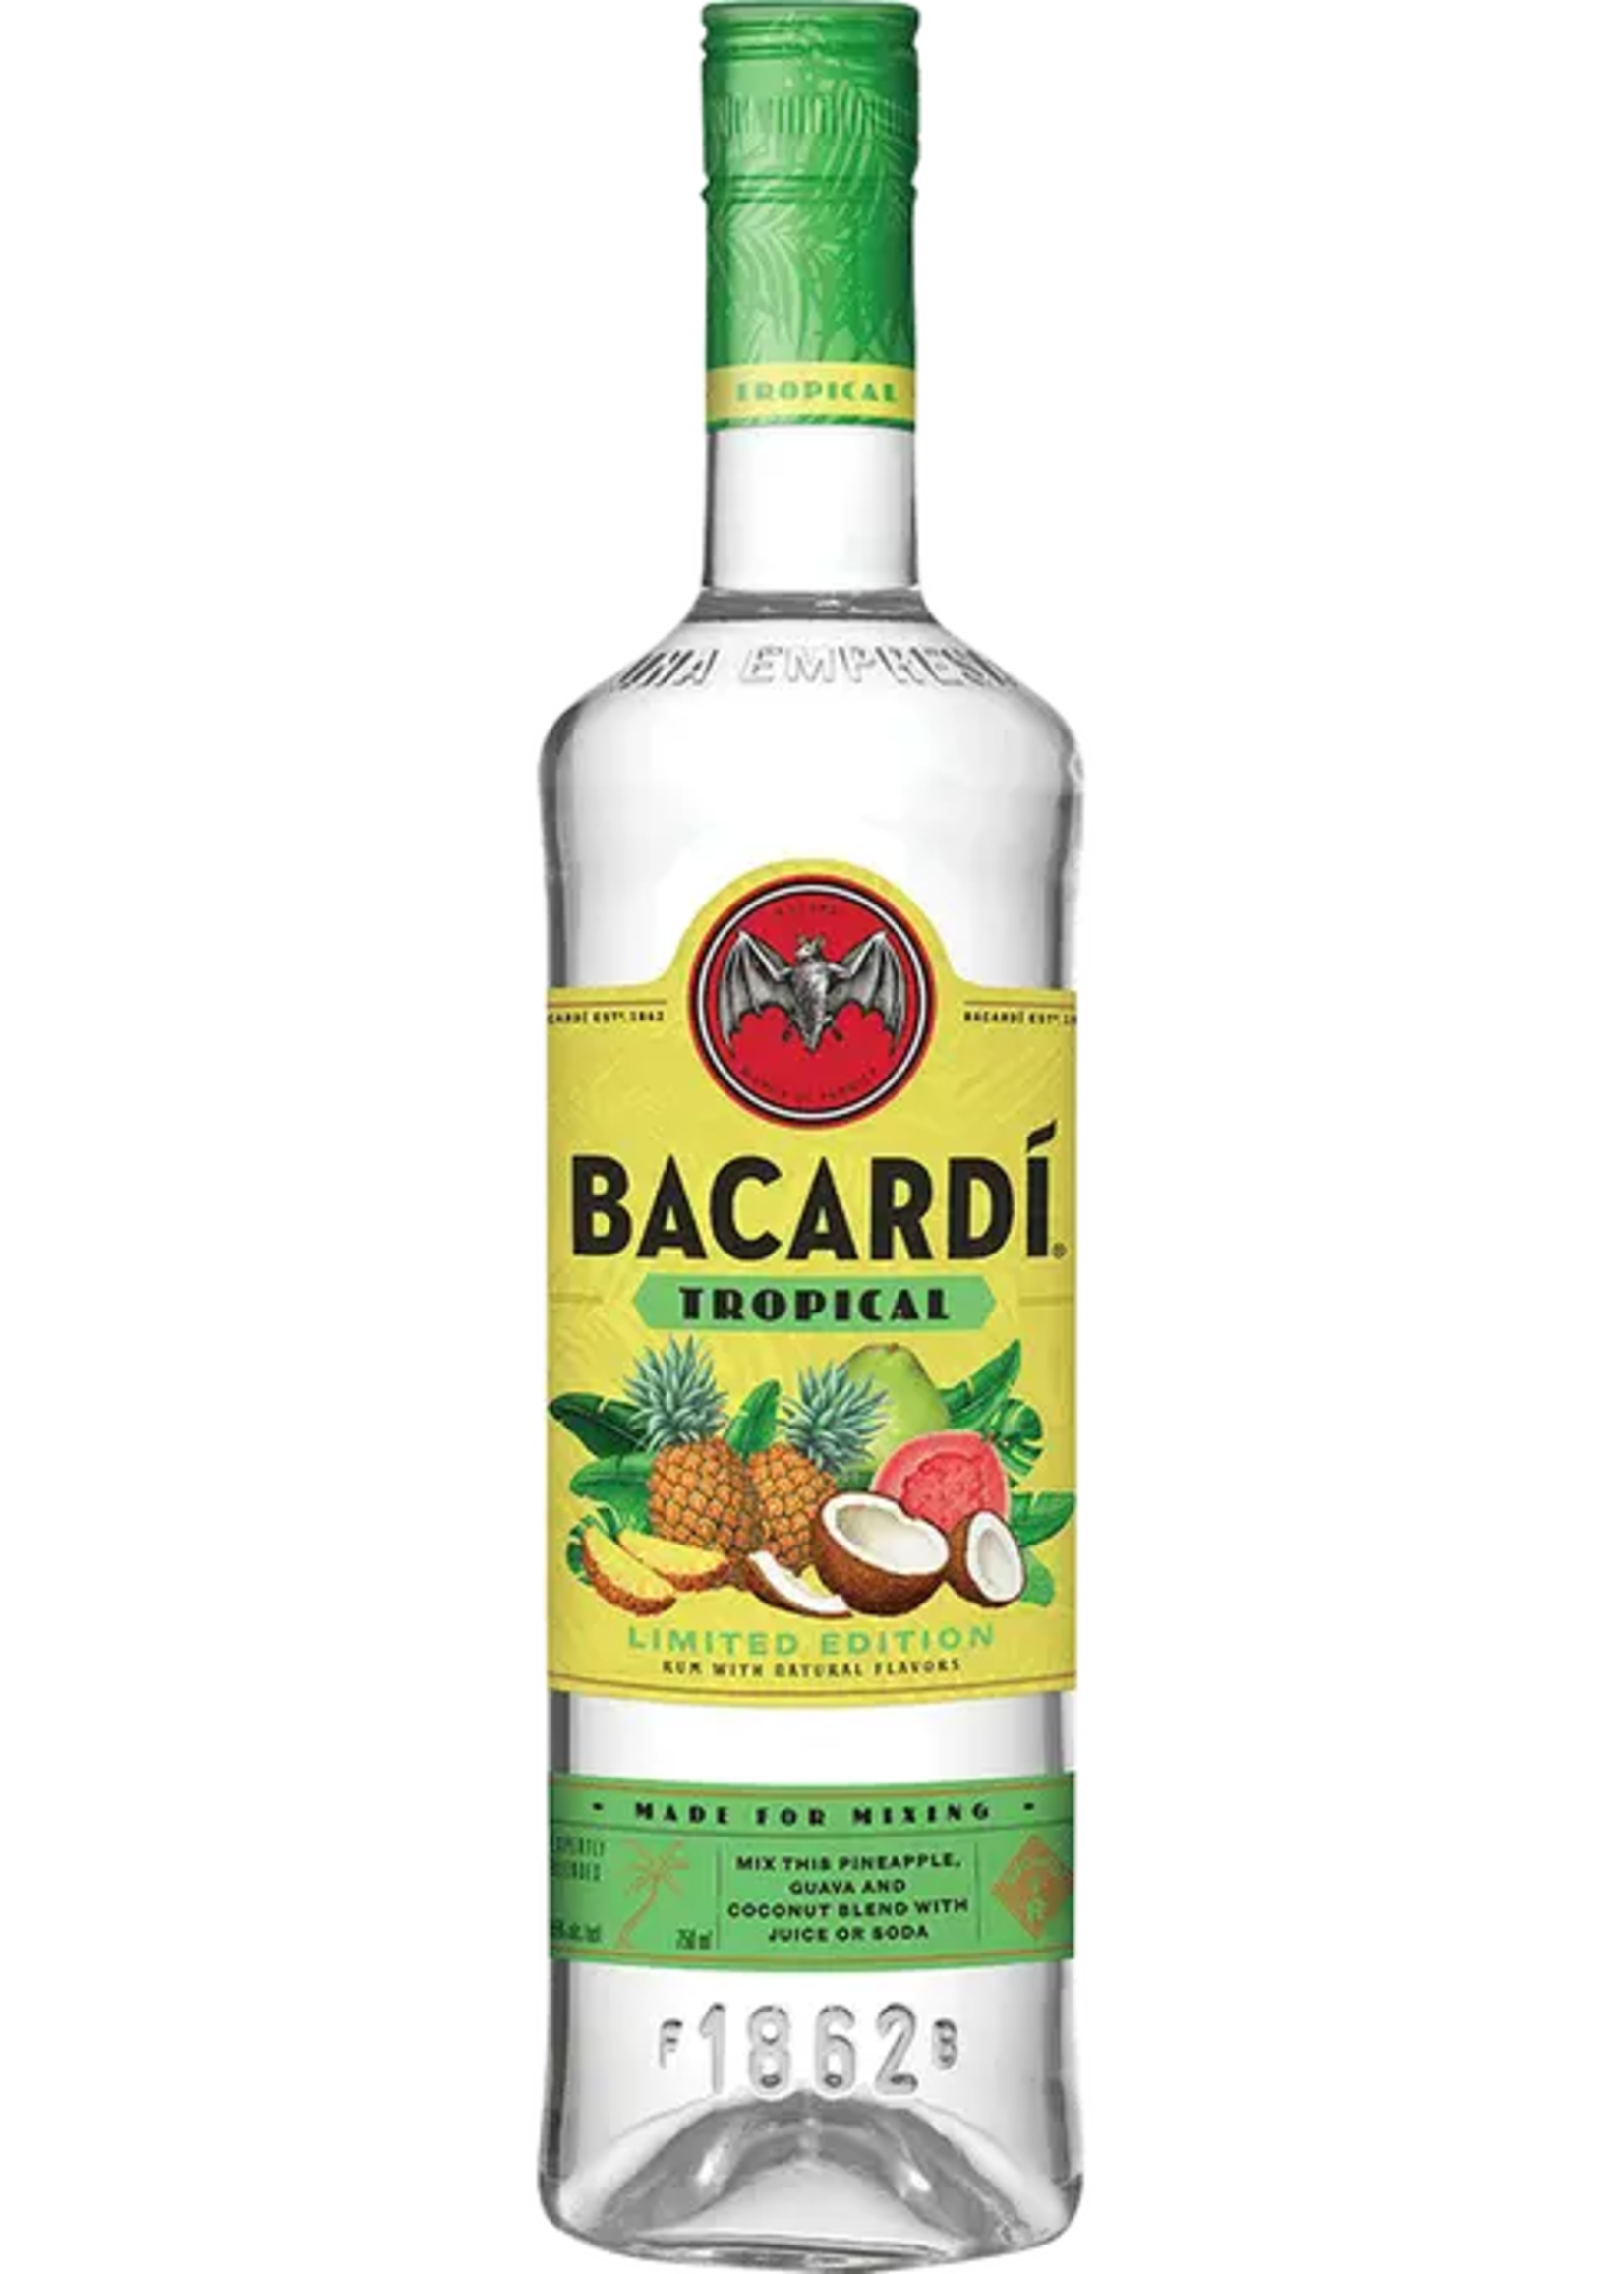 Bacardi Bacardi Tropical Flavored Rum Limited Edition 70Proof 1 Ltr